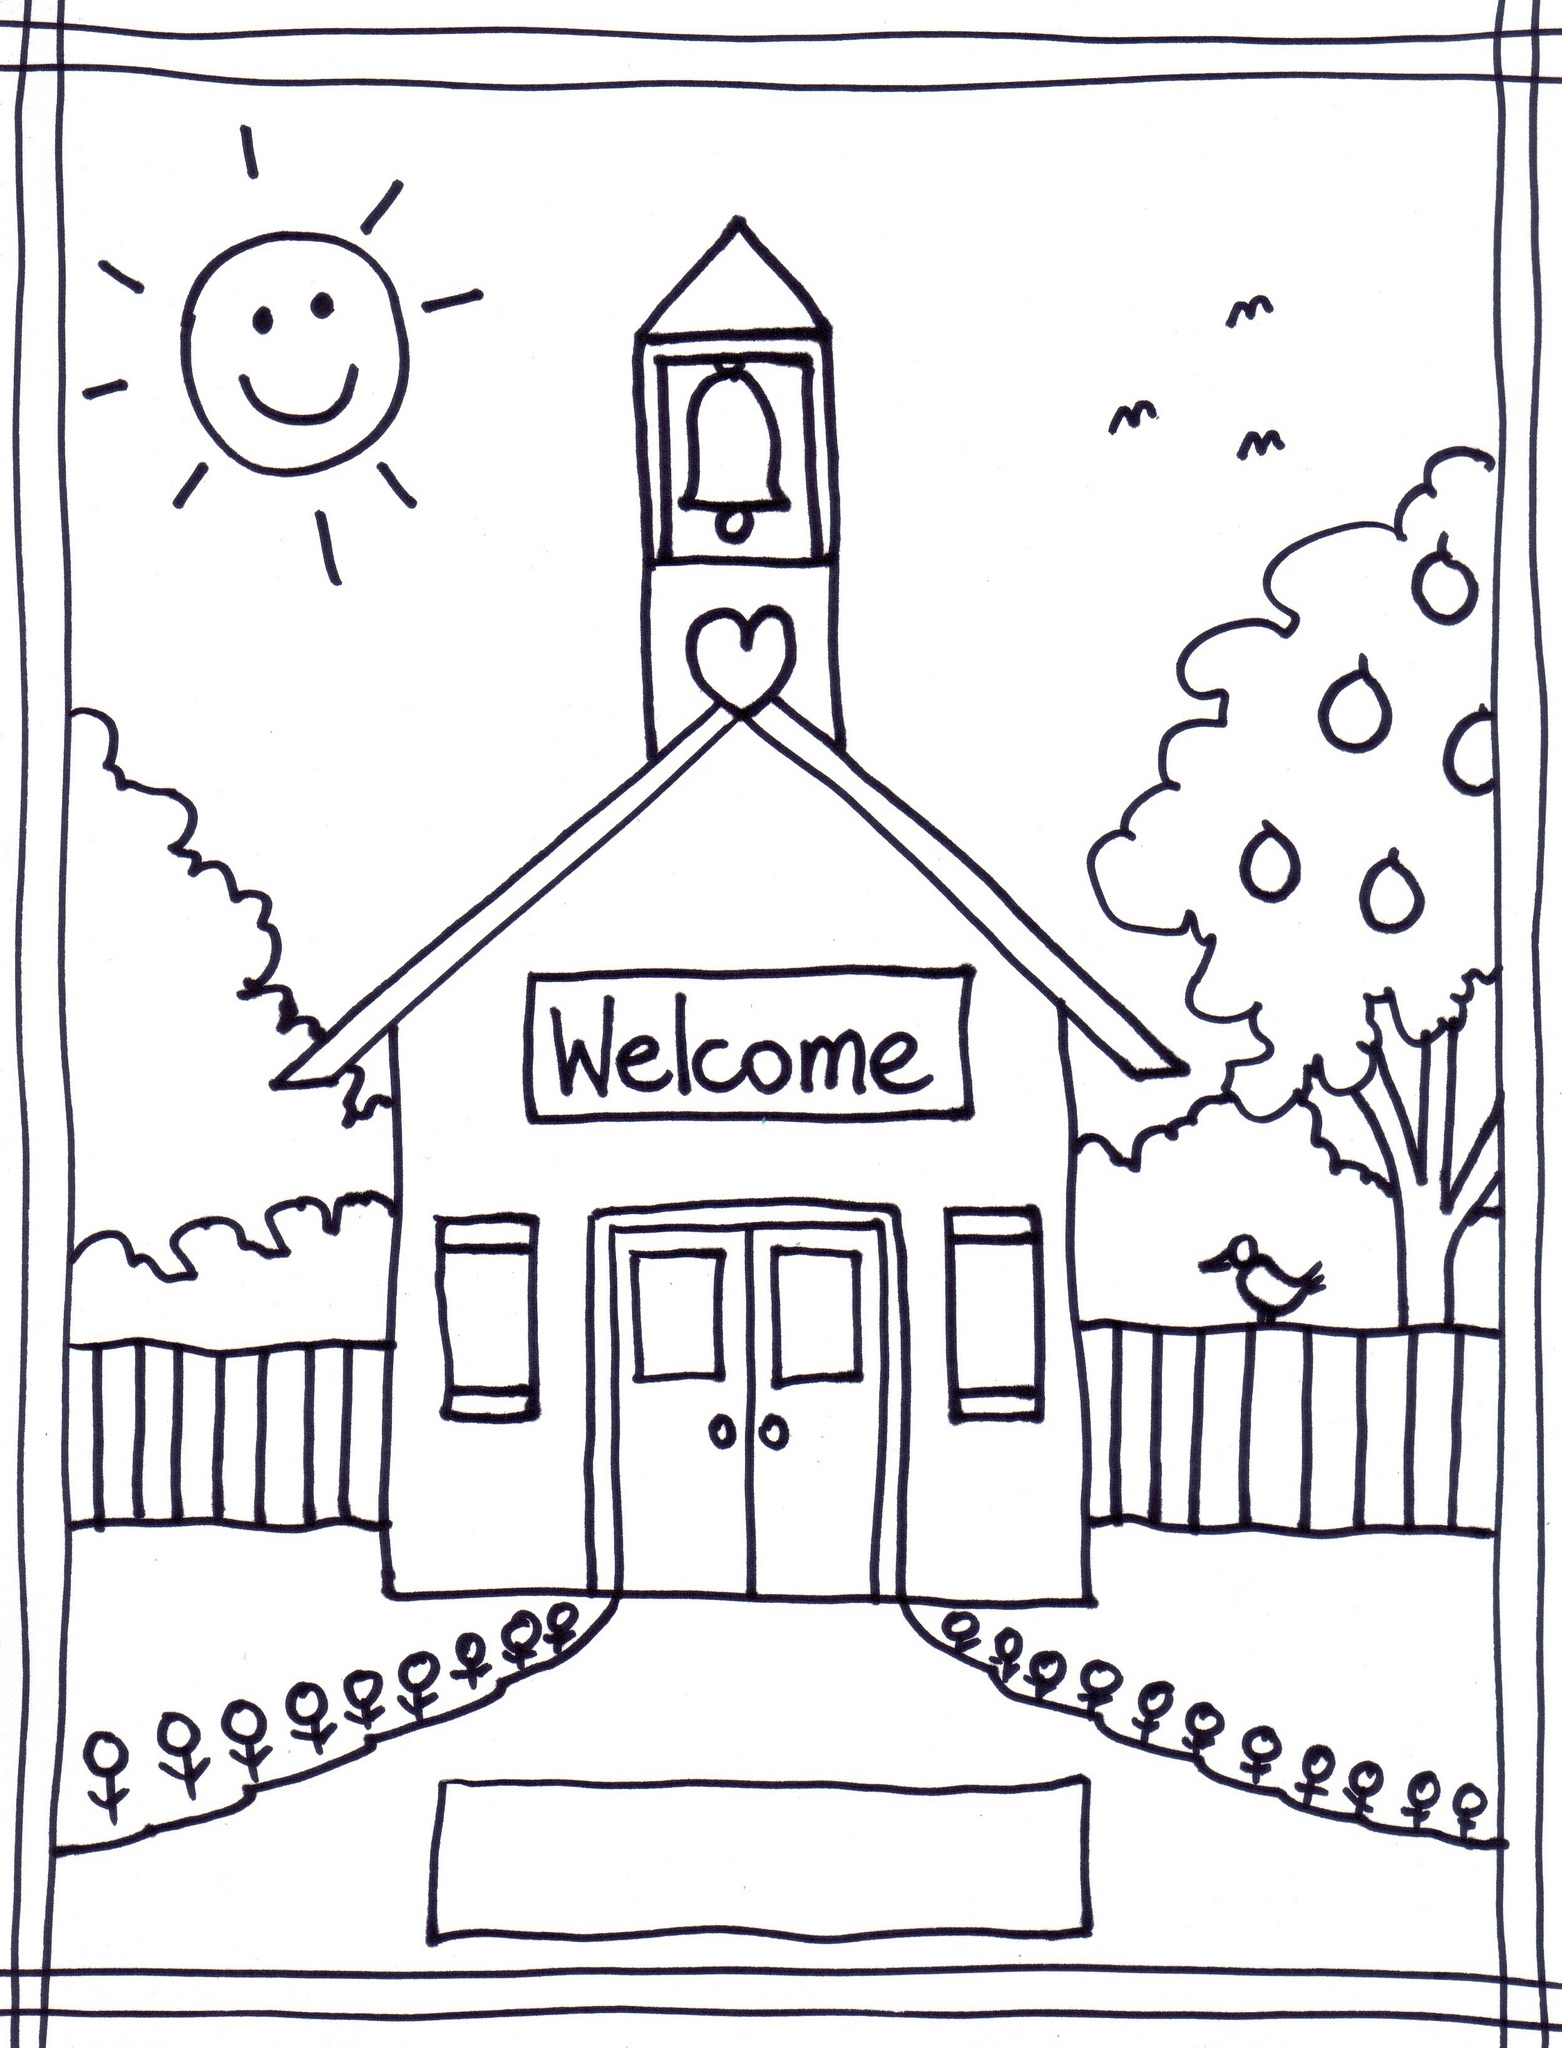  School House coloring pages, Coloring for kids, Welcome happy day